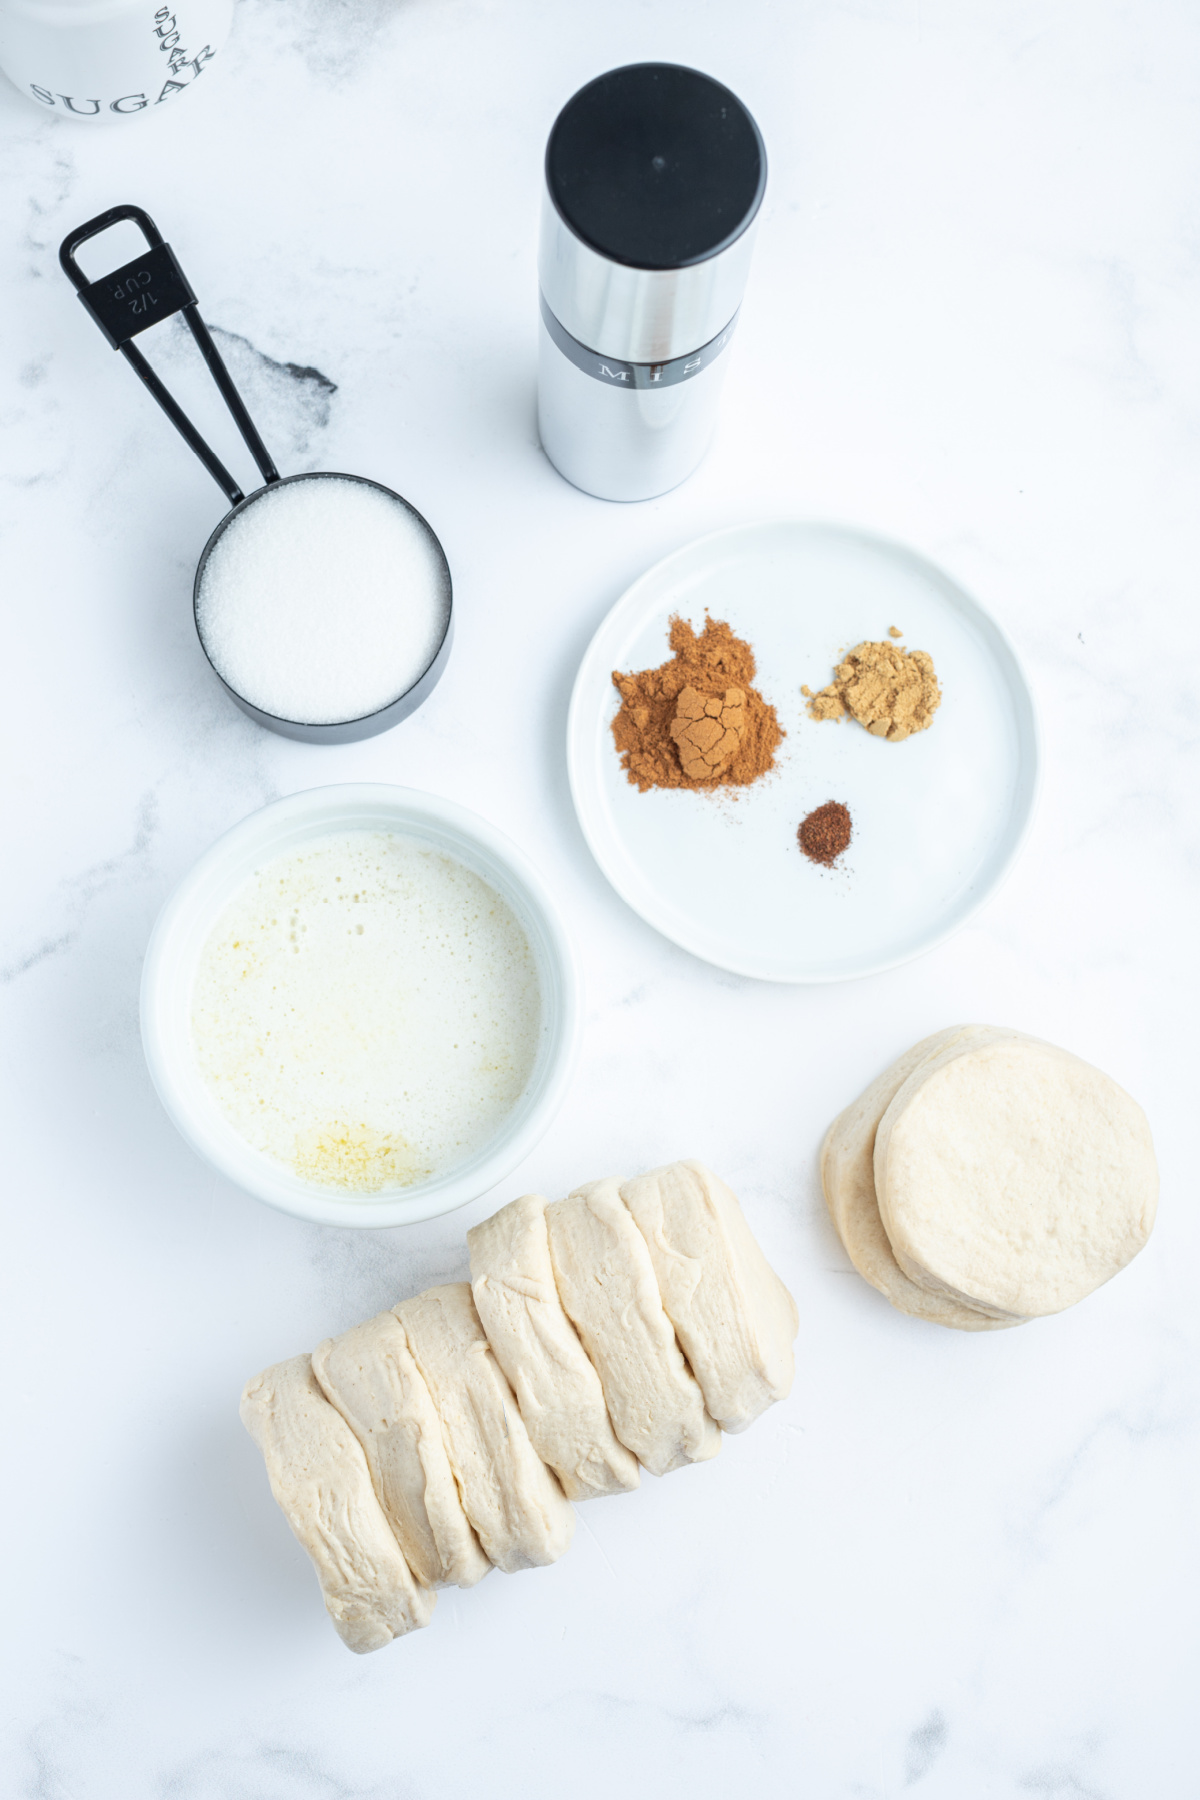 ingredients displayed for making air fryer canned biscuit donuts